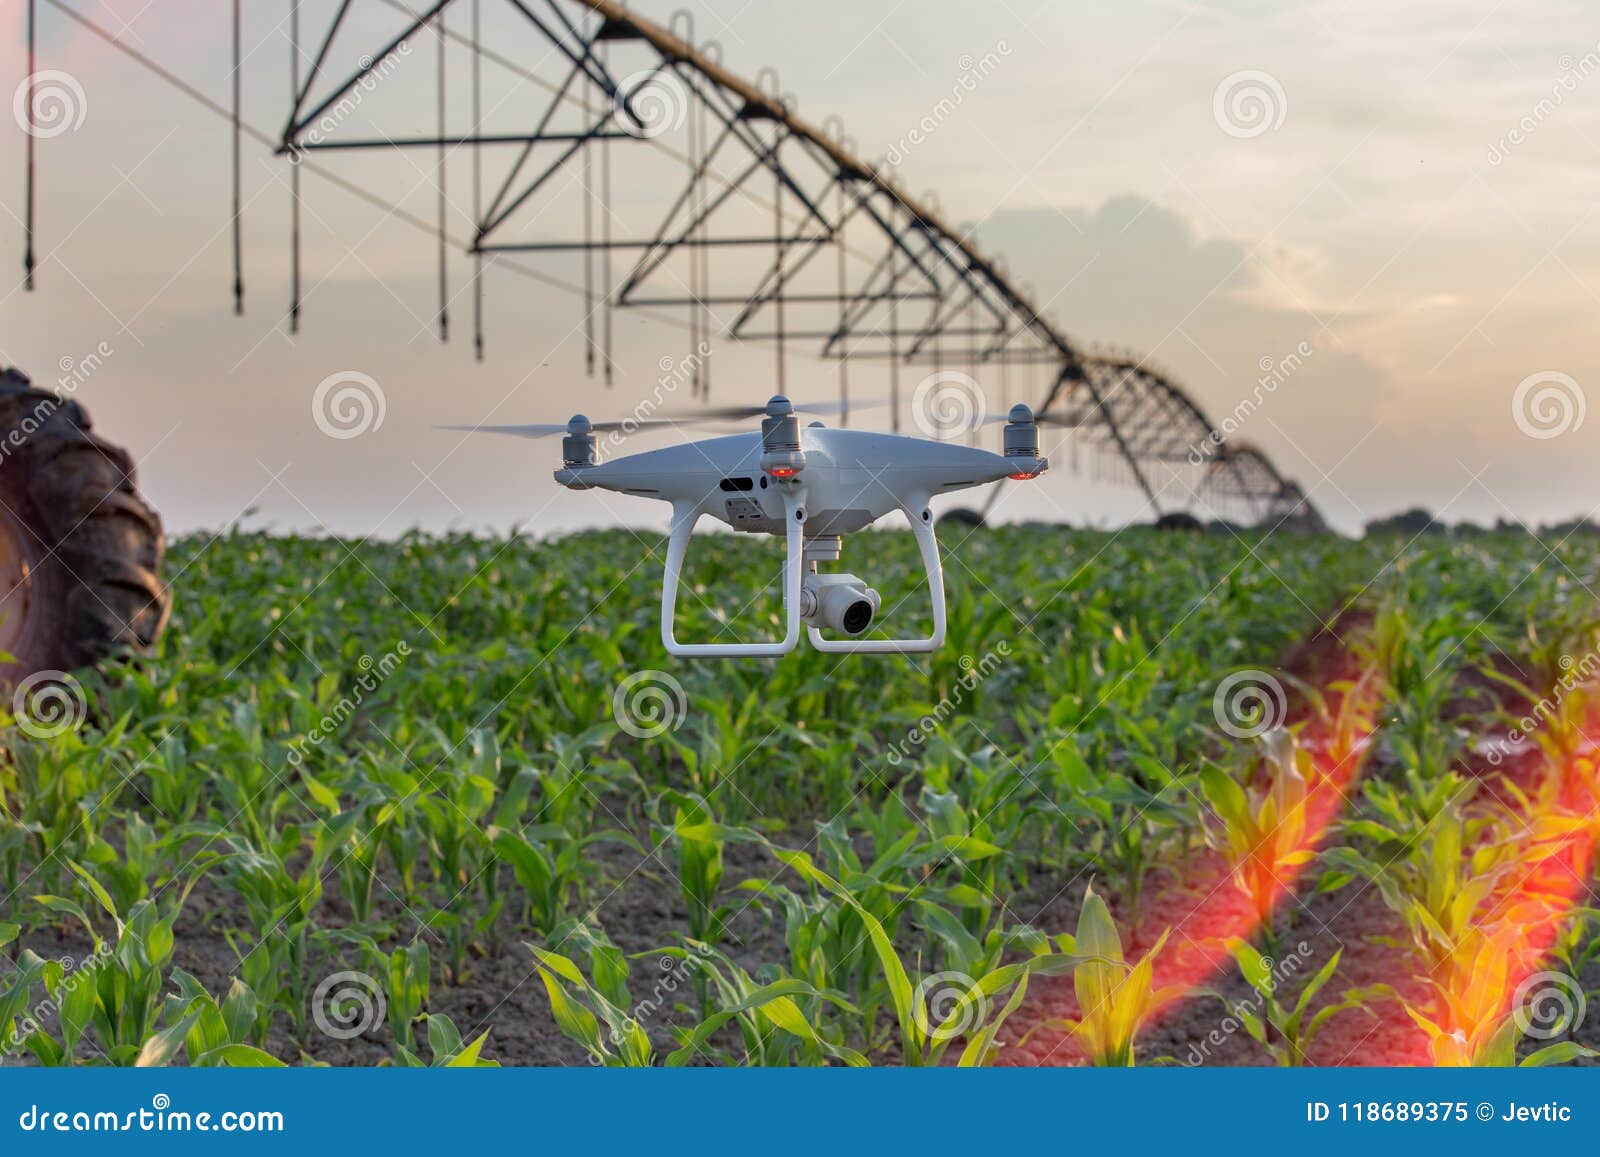 drone flying above corn field and mapping